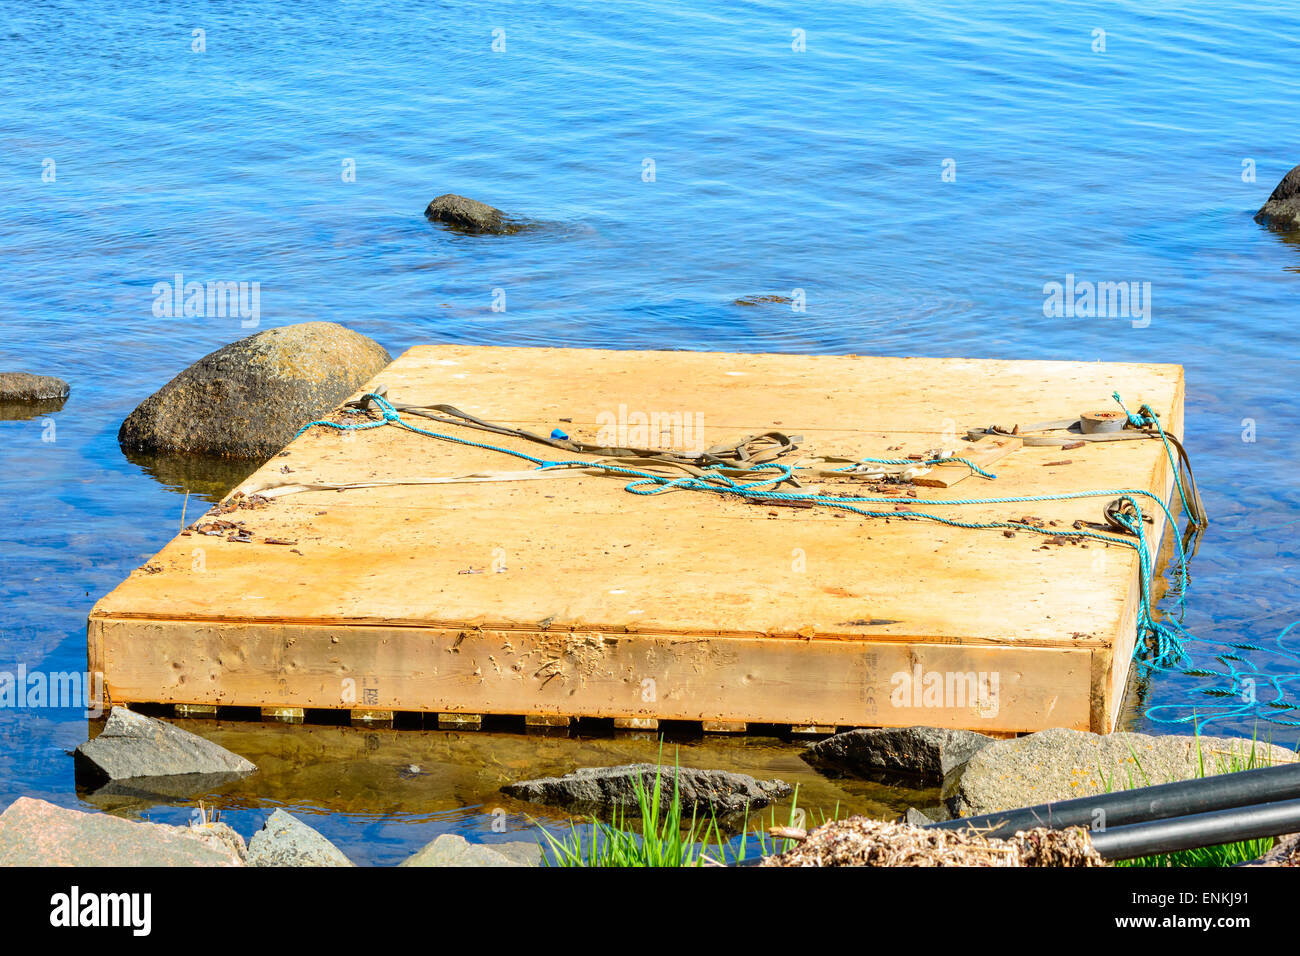 Wooden floating work platform by the shore close to stones. Blue water around and some ropes on the platform. Stock Photo